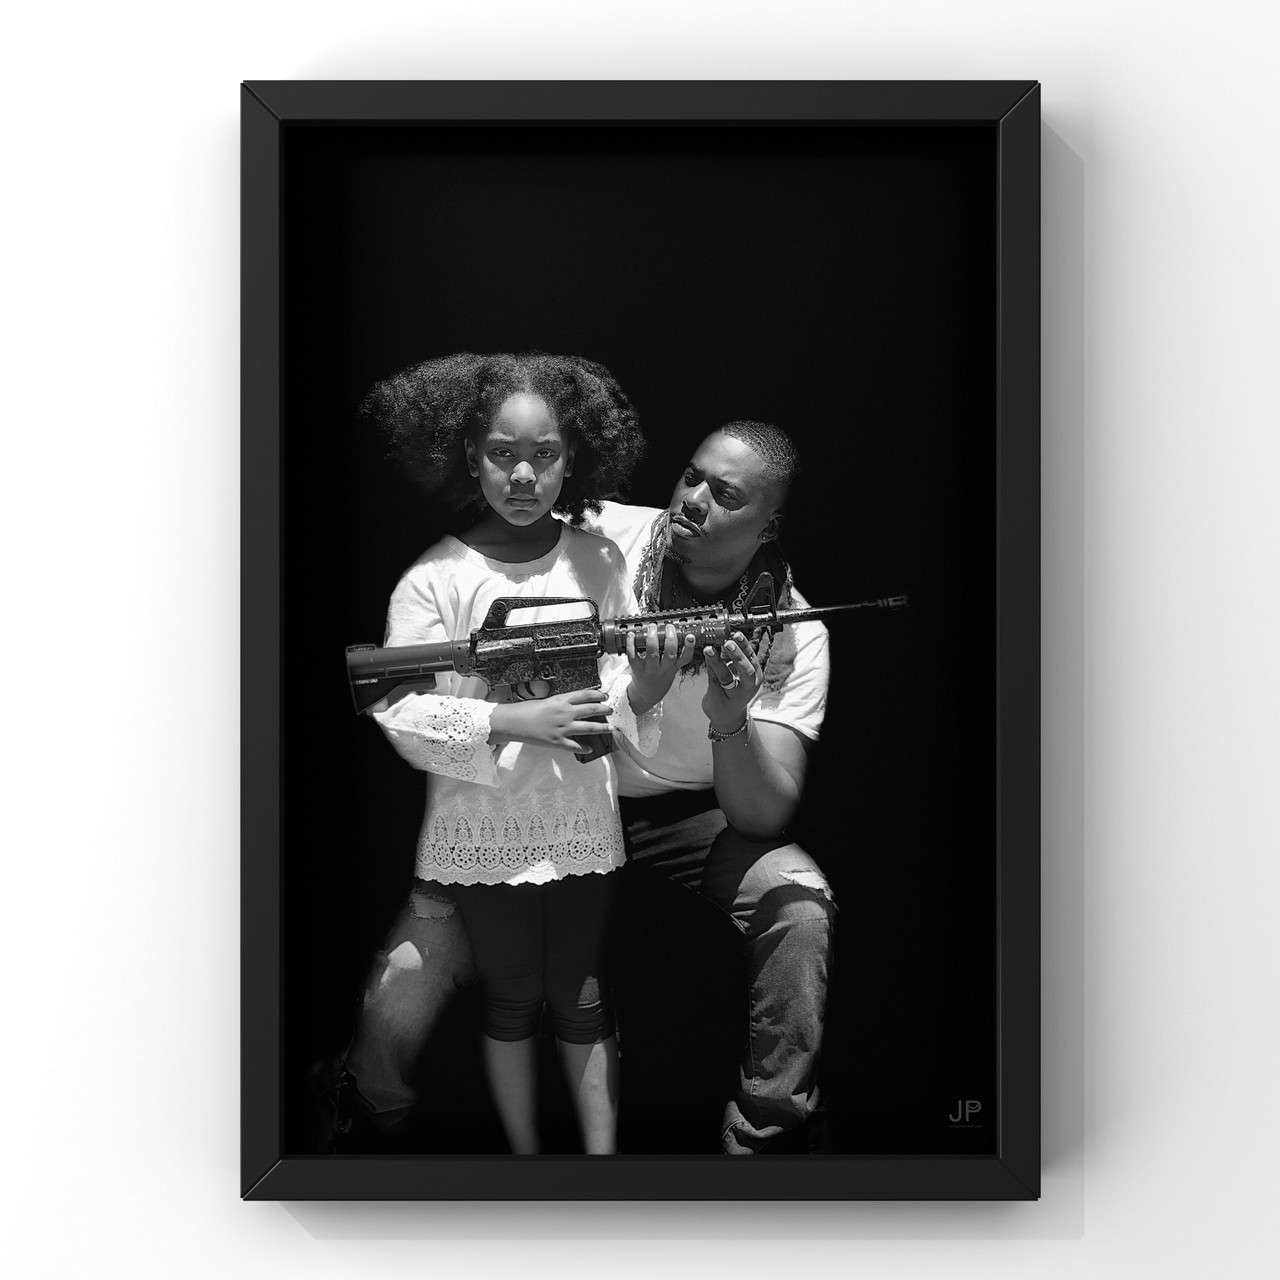 Photo on canvas by JP Jermaine Powell, a small girl holds a gun with the artist